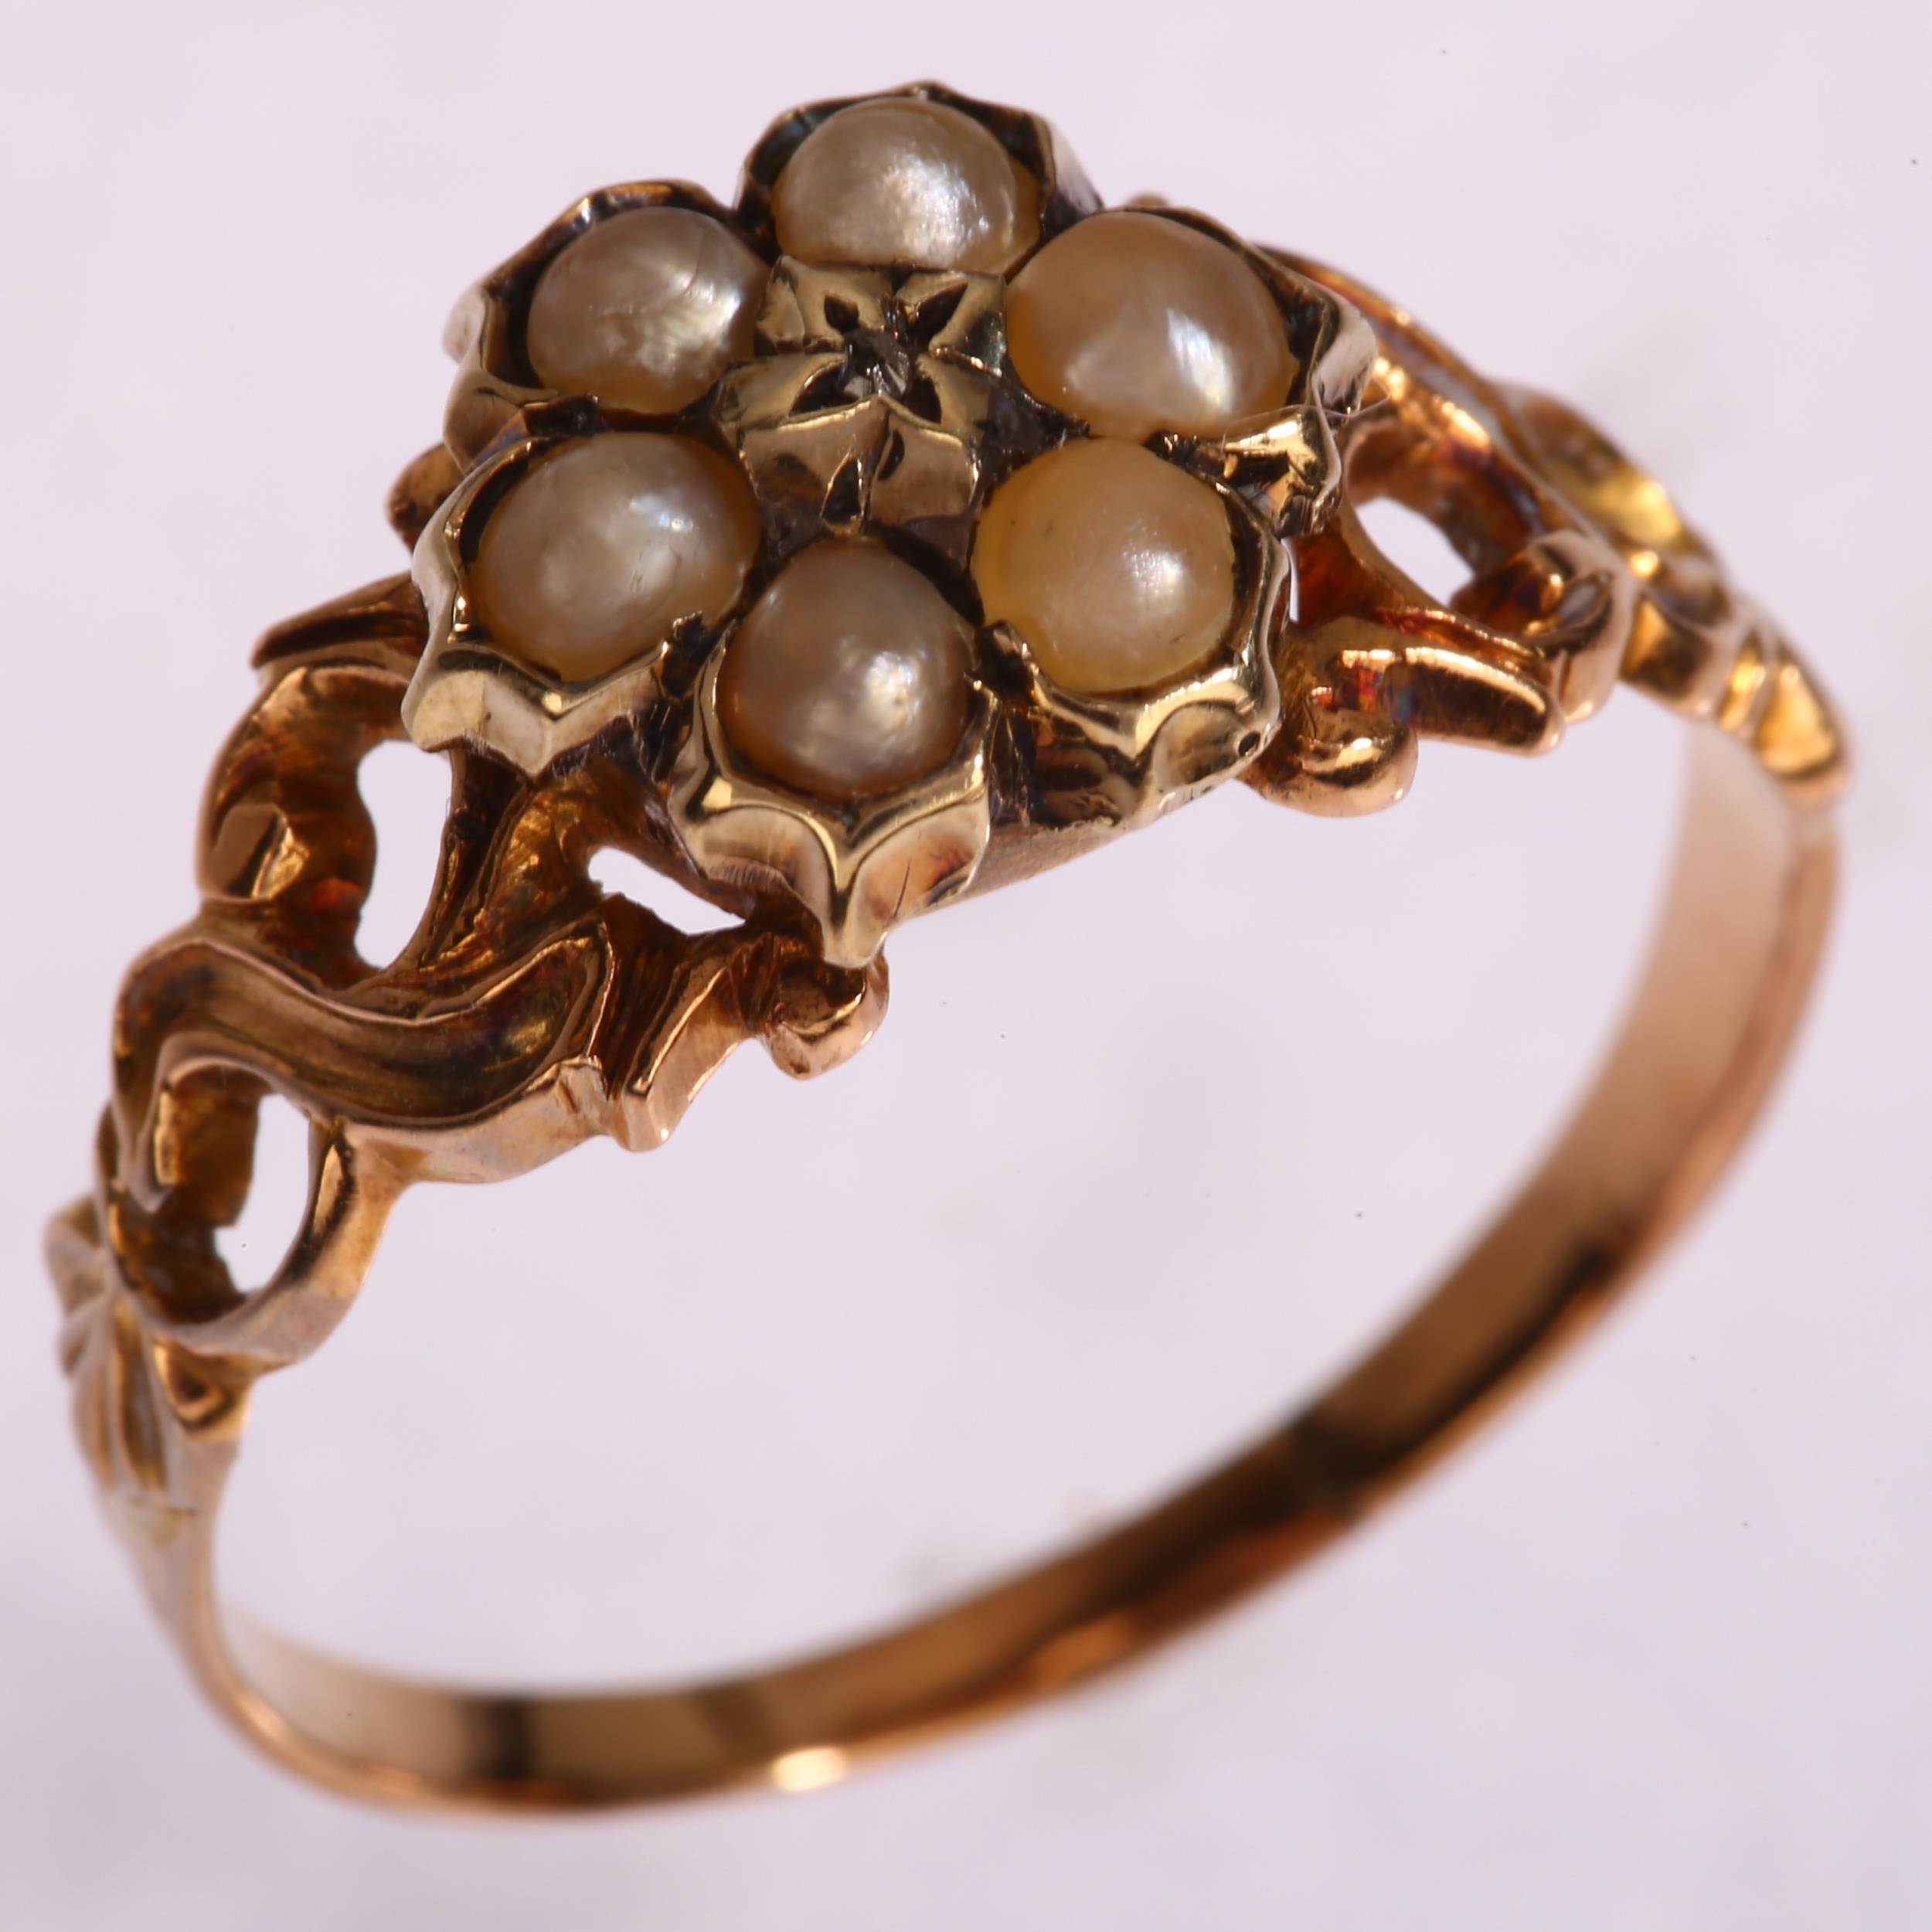 A 19th century diamond and split pearl mourning ring, unmarked gold settings with central flowerhead - Image 2 of 3